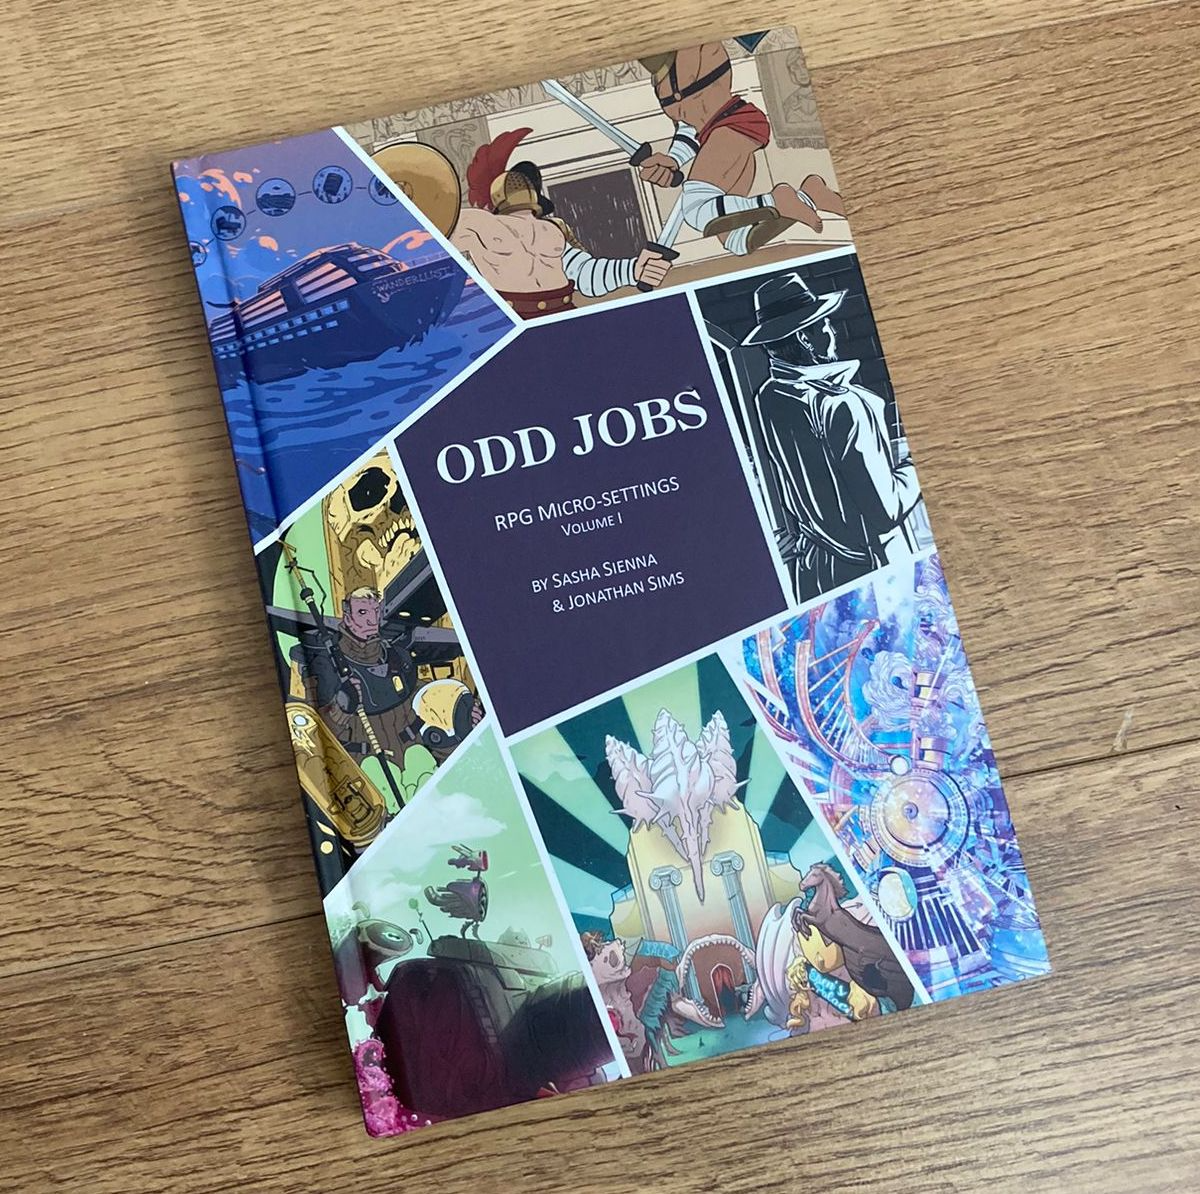 picture of the Odd Jobs book on a wooden floor